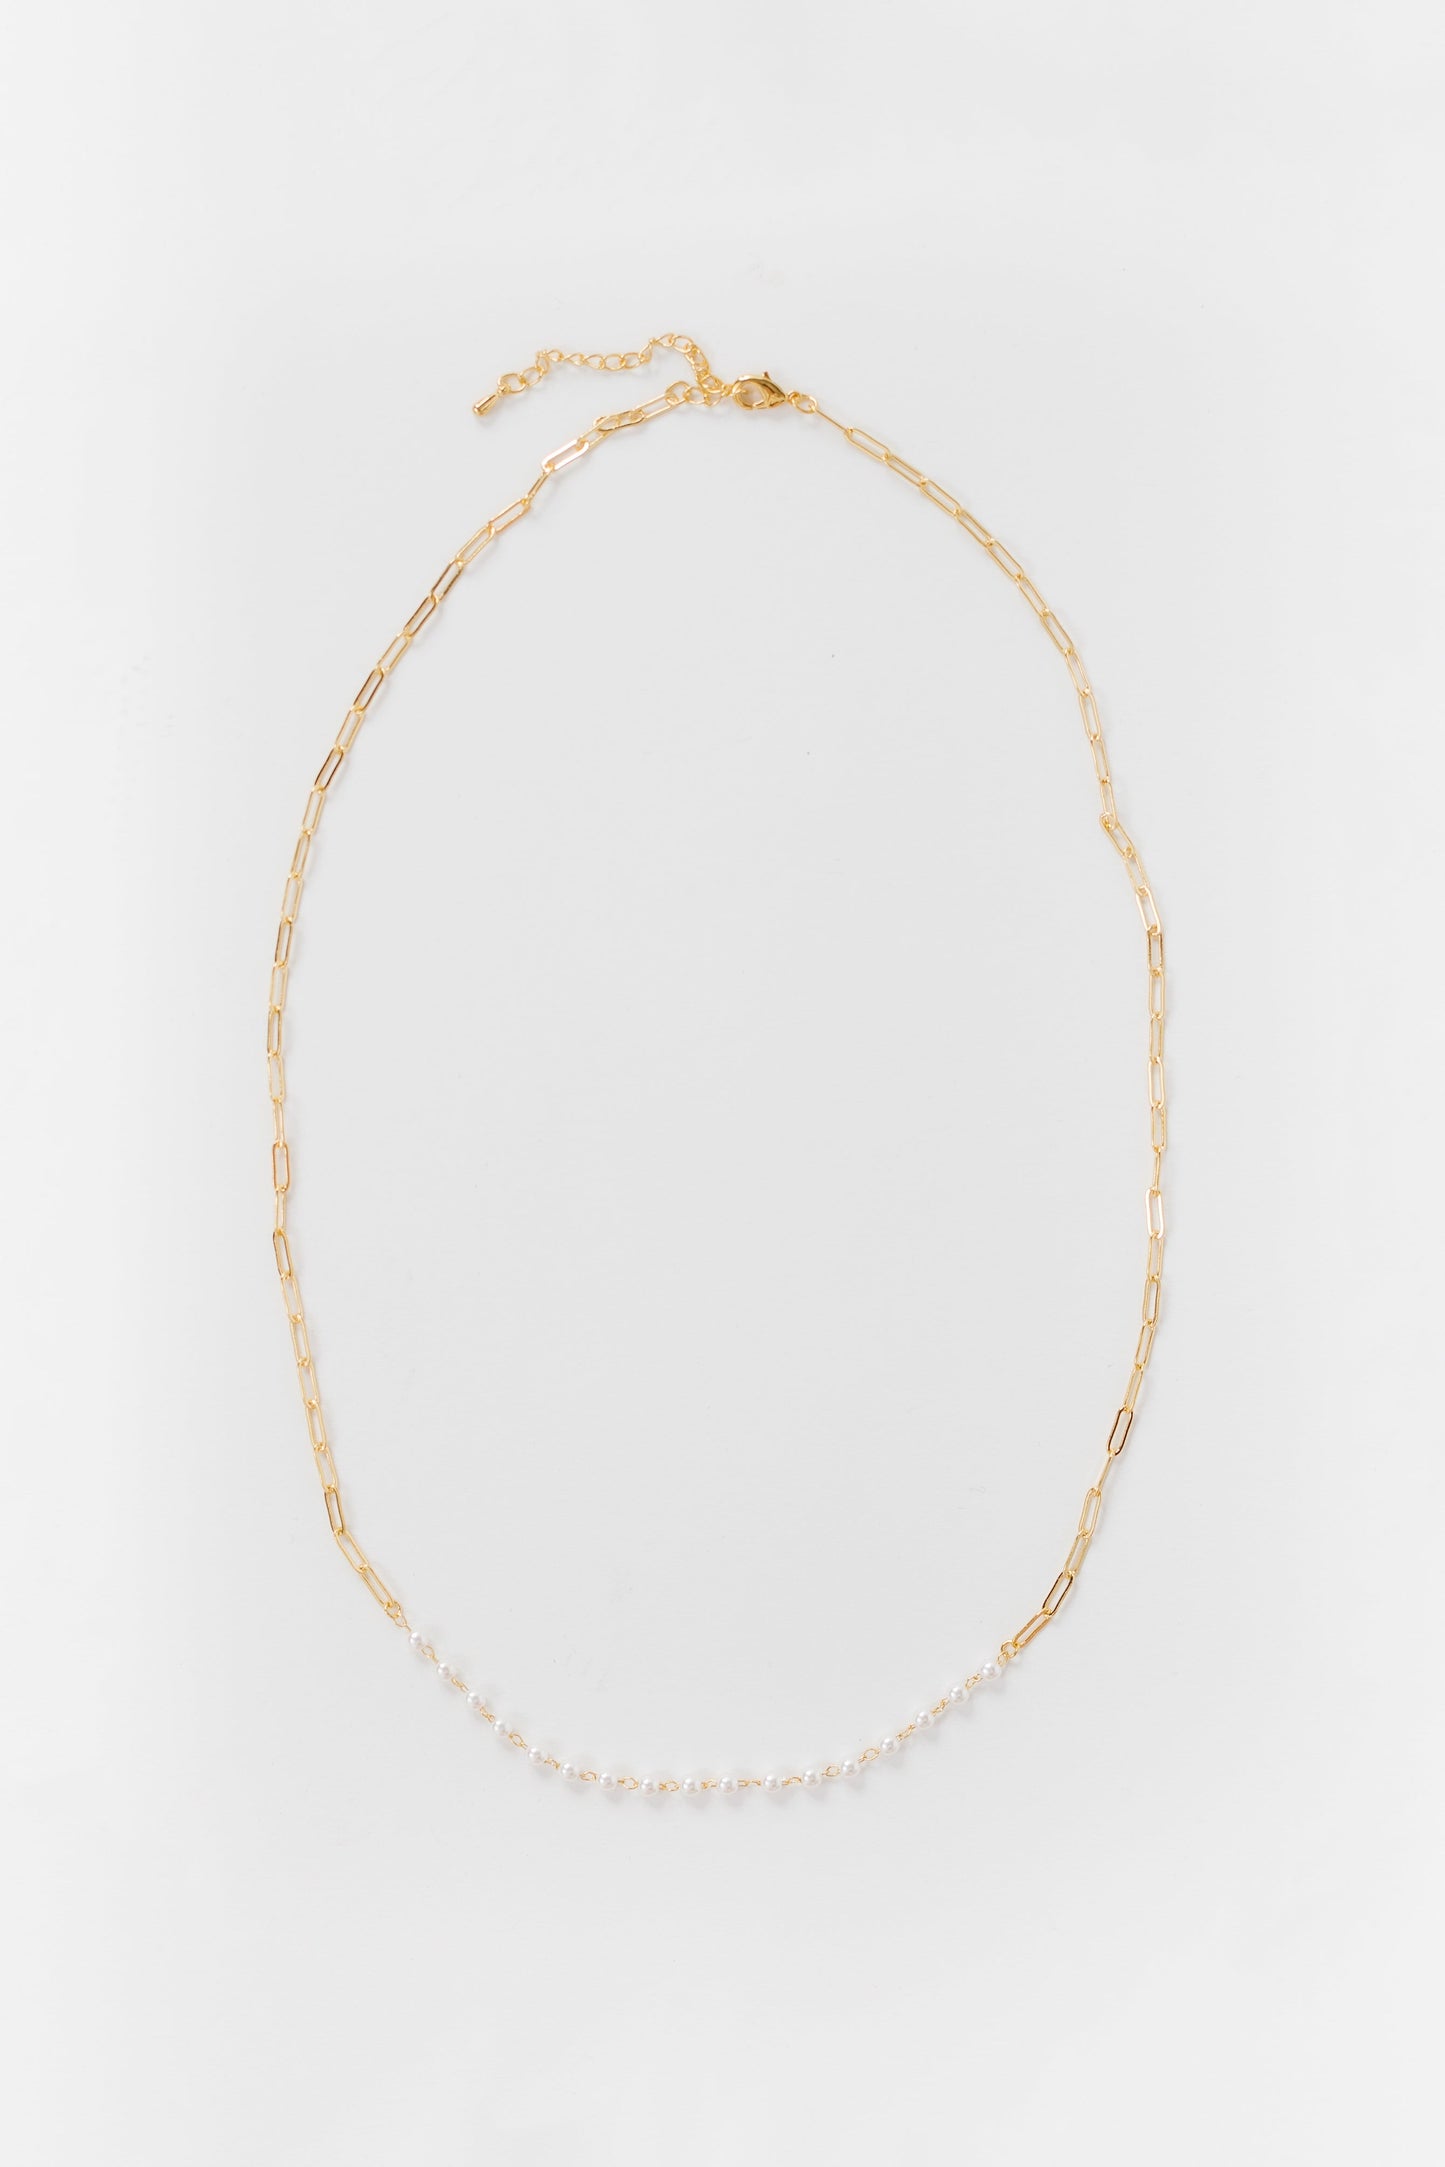 Cove Delicate Pearl Paperclip Necklace WOMEN'S NECKLACE Cove Accessories Gold 16" 